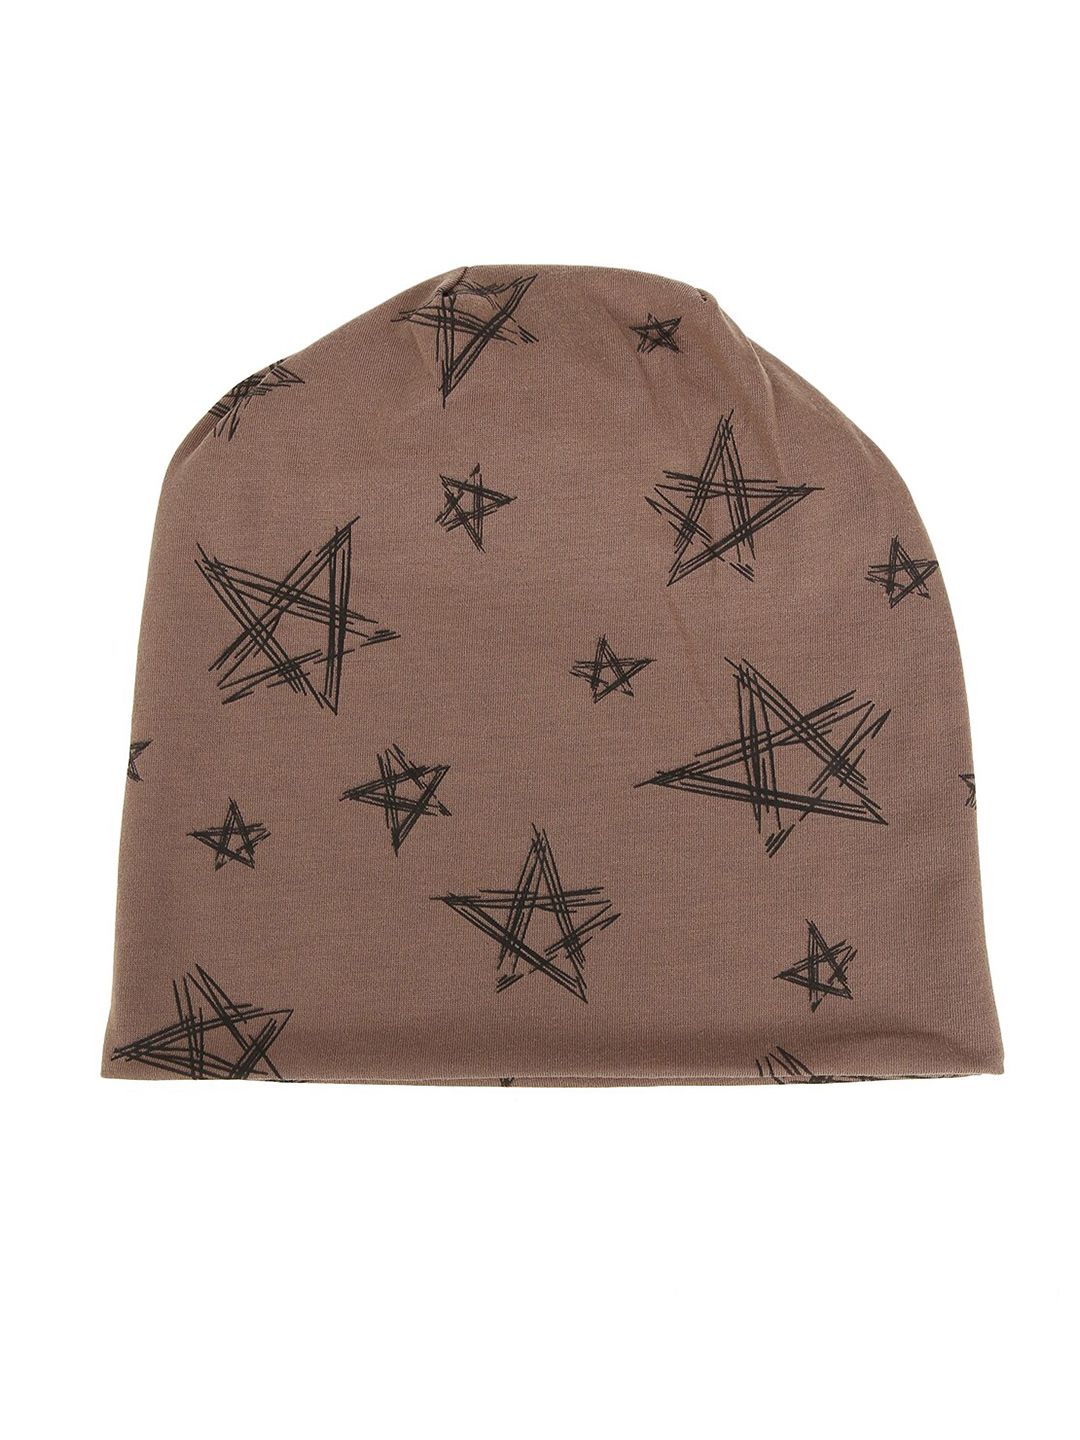 iSWEVEN Unisex Brown & Black Printed Cotton Beanie Cap Price in India